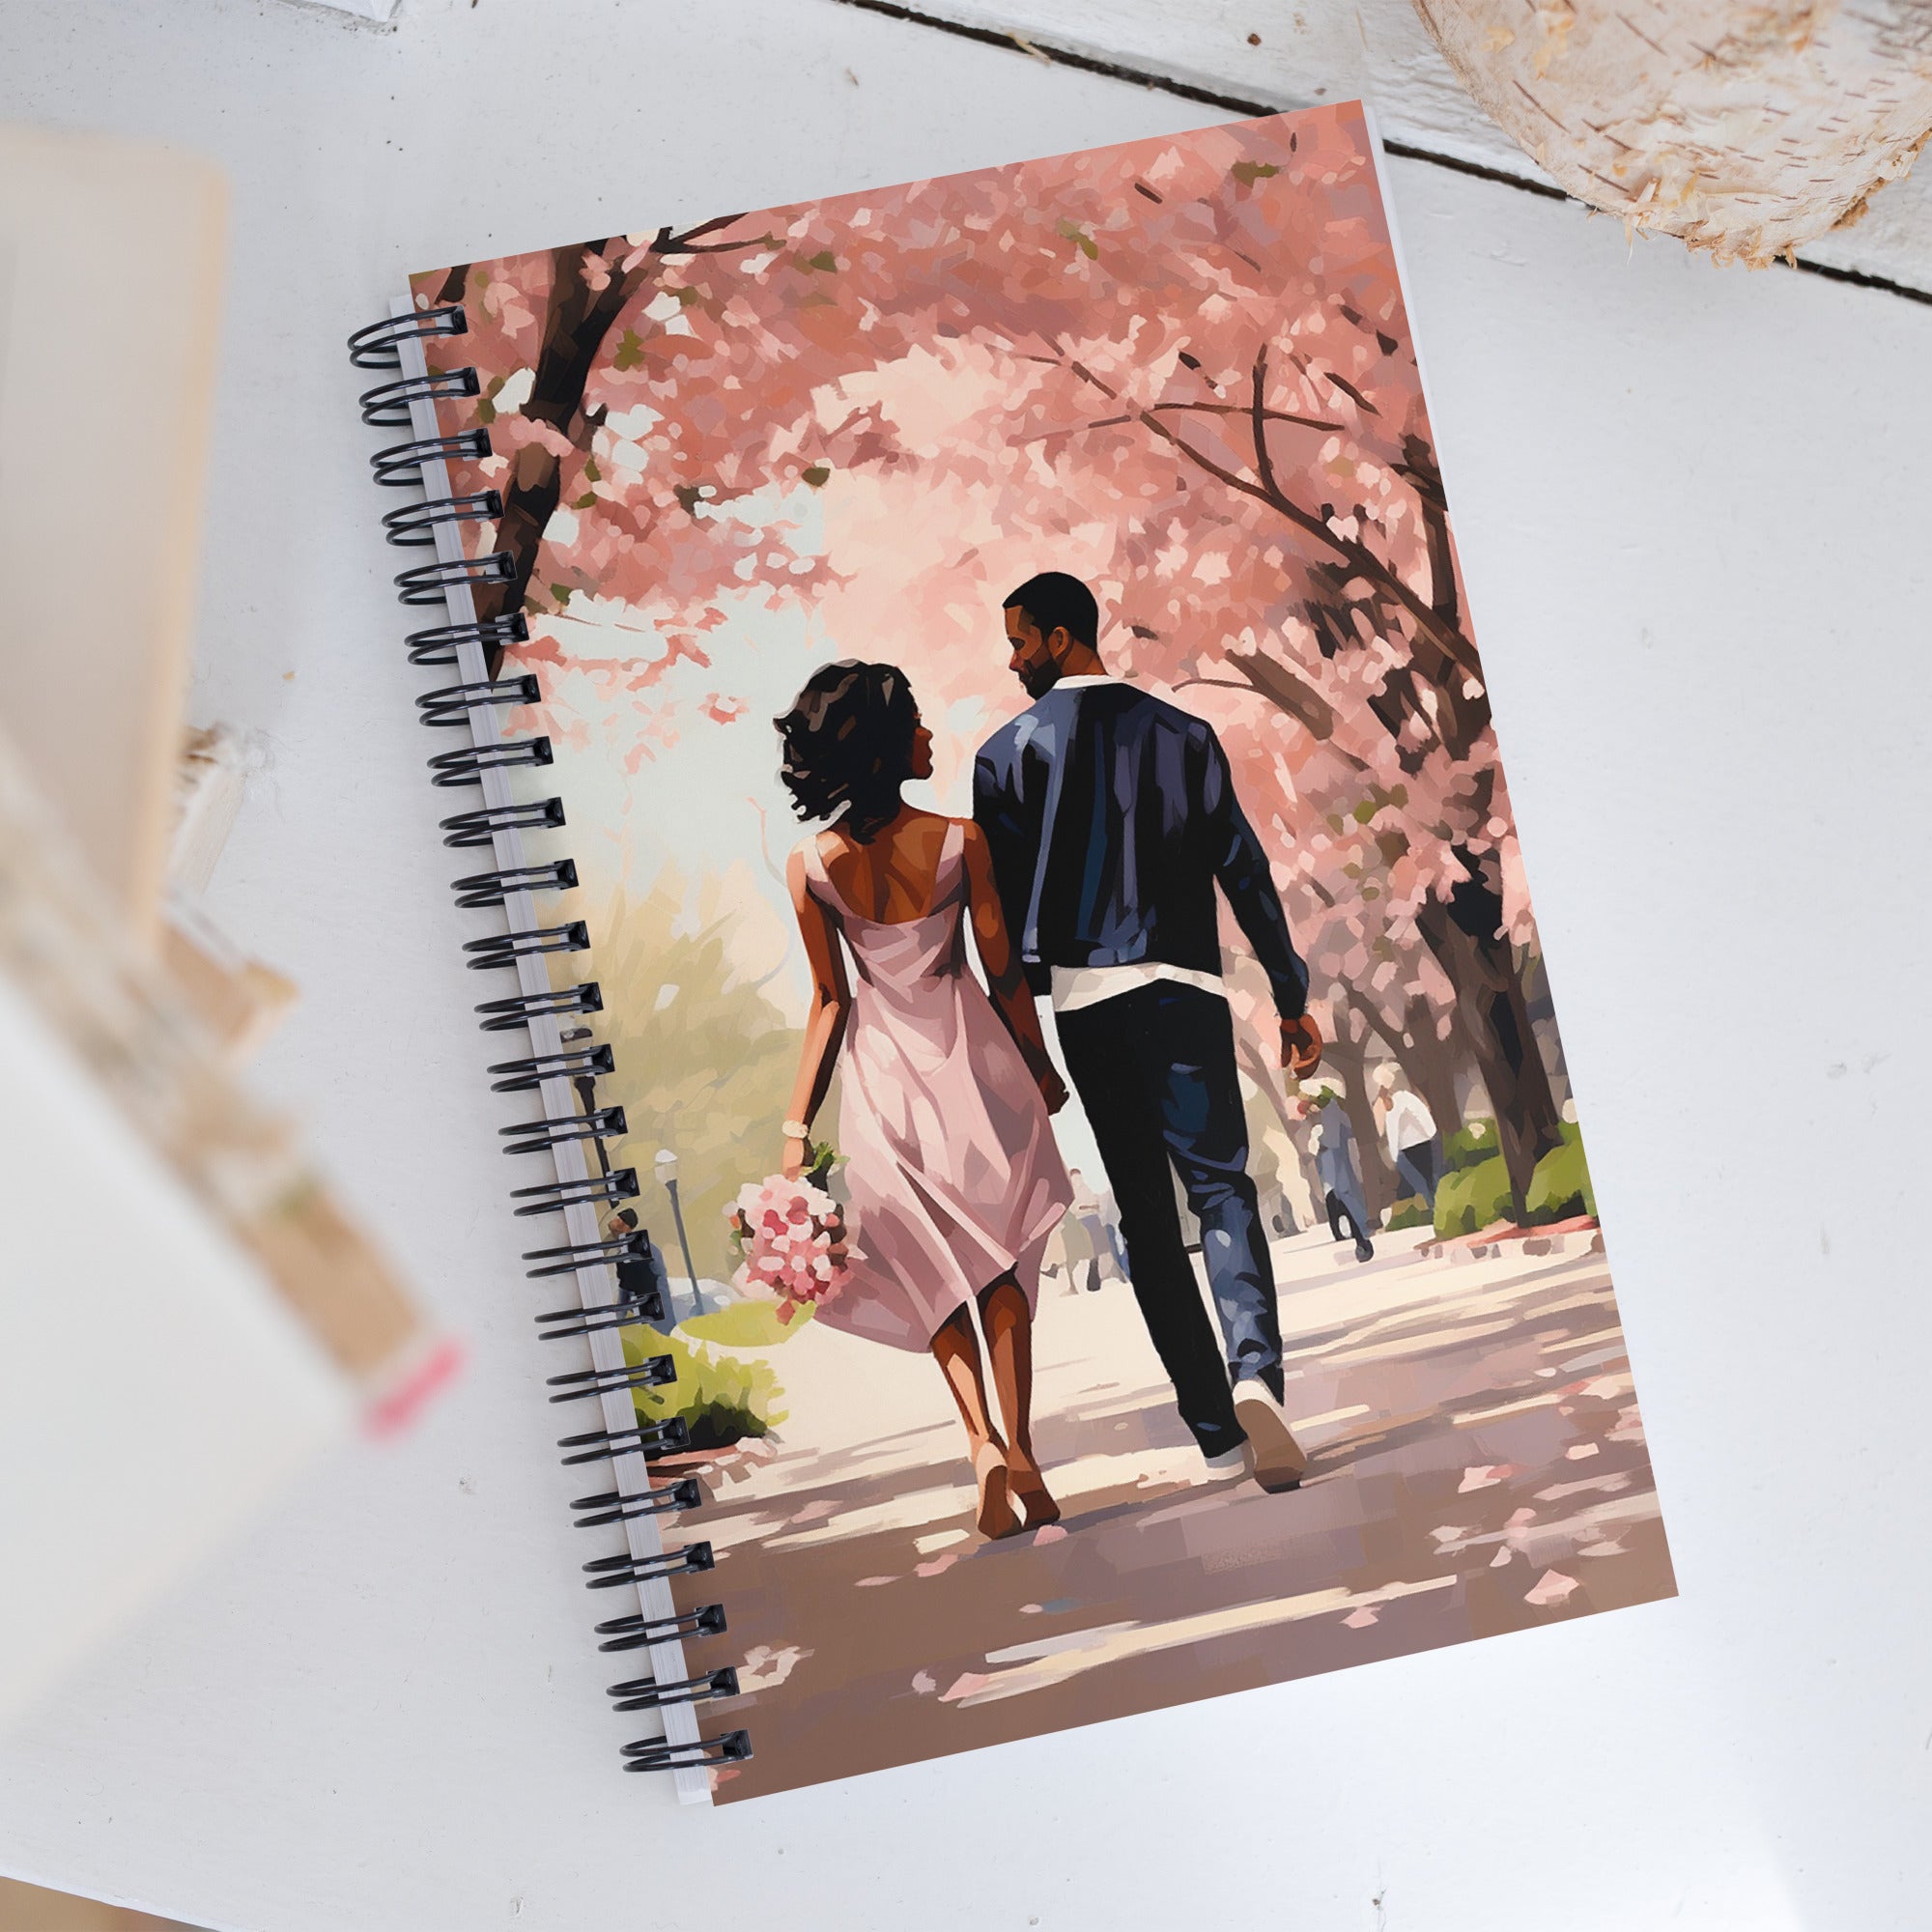 Cuaderno - A Stroll Among the Blossoms | Drese Art